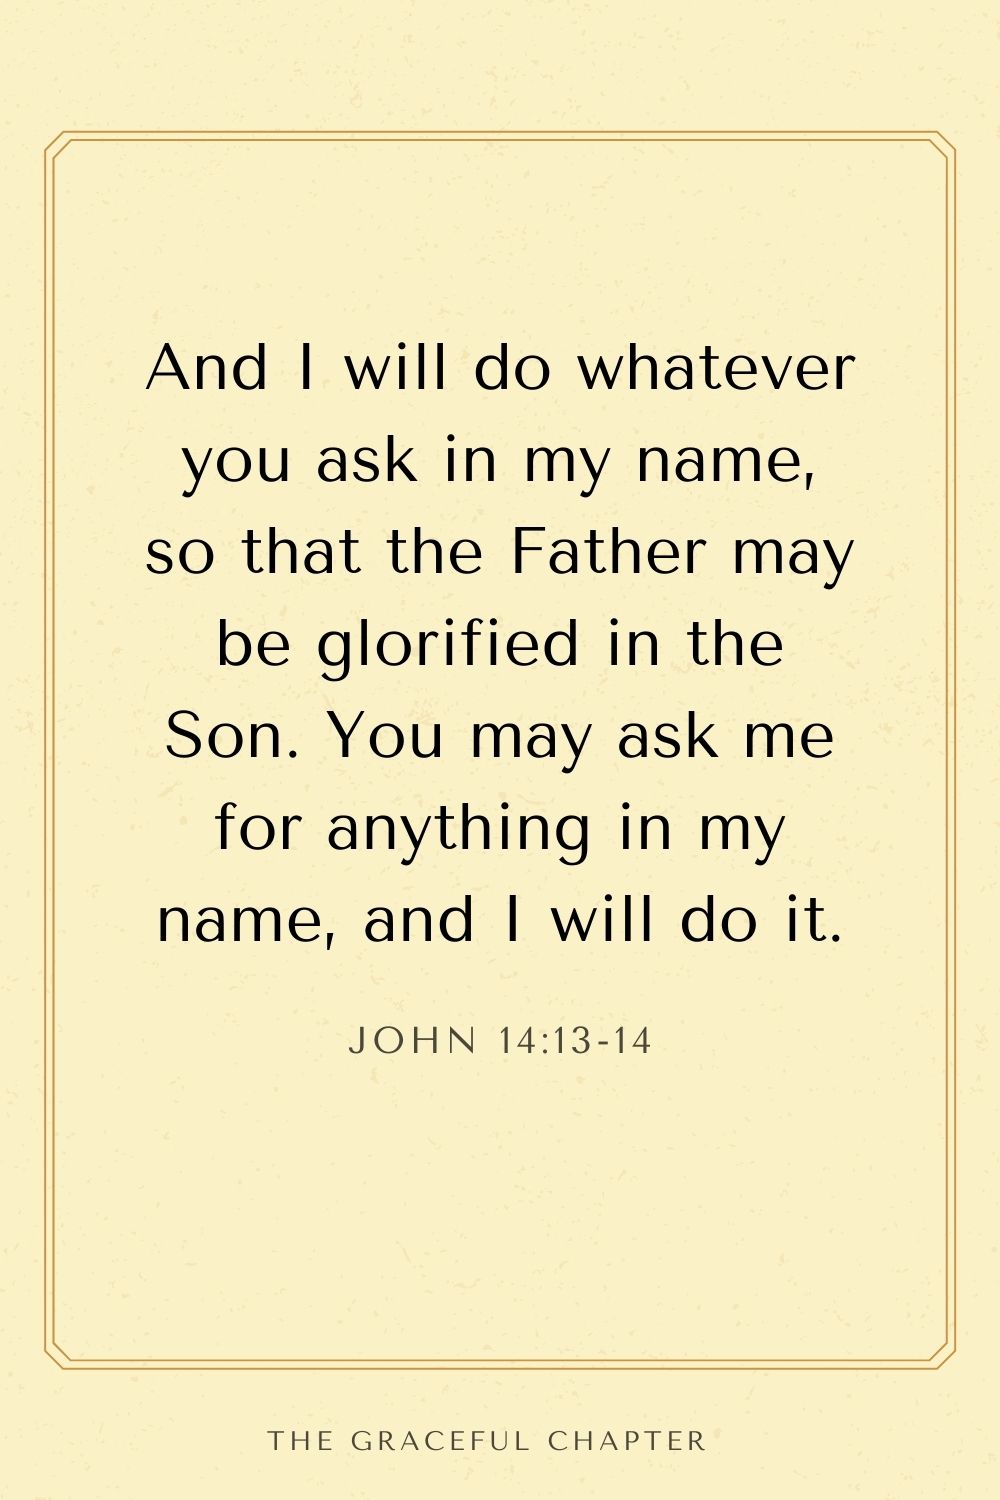 And I will do whatever you ask in my name, so that the Father may be glorified in the Son. You may ask me for anything in my name, and I will do it. John 14:13-14